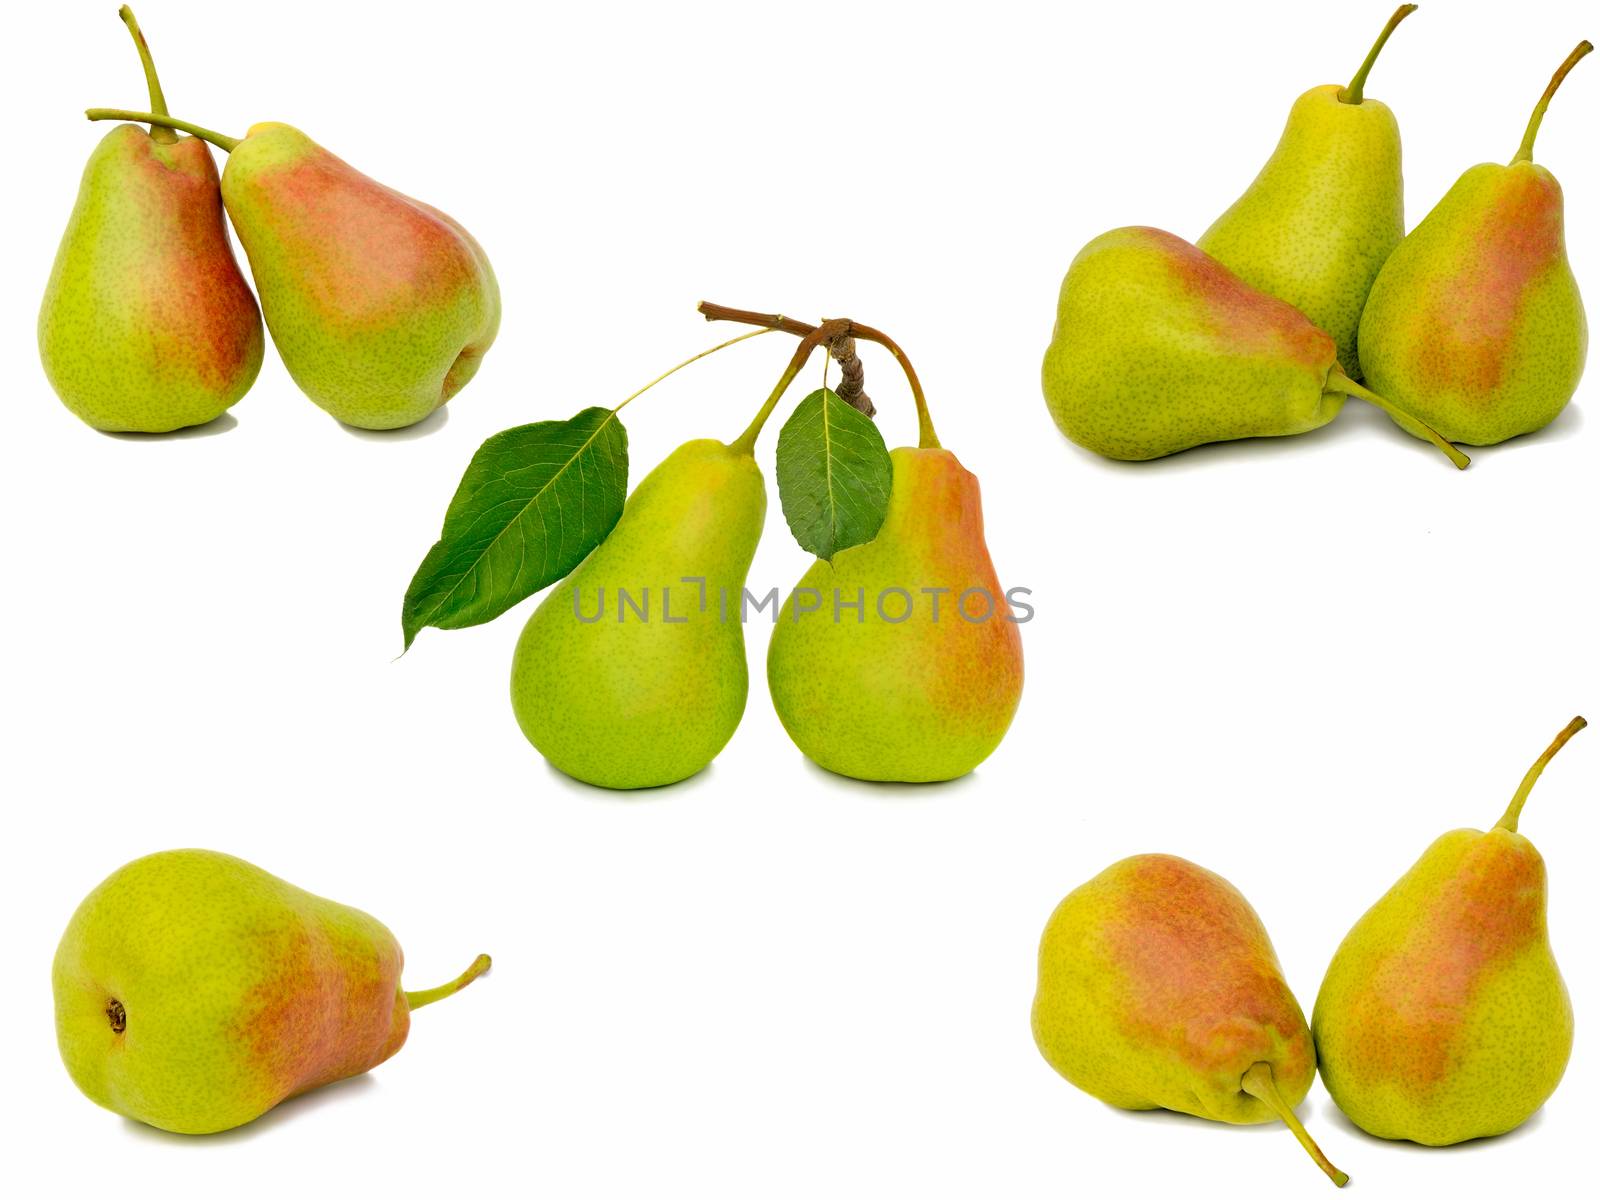 On a white background are groups of ripe pear.